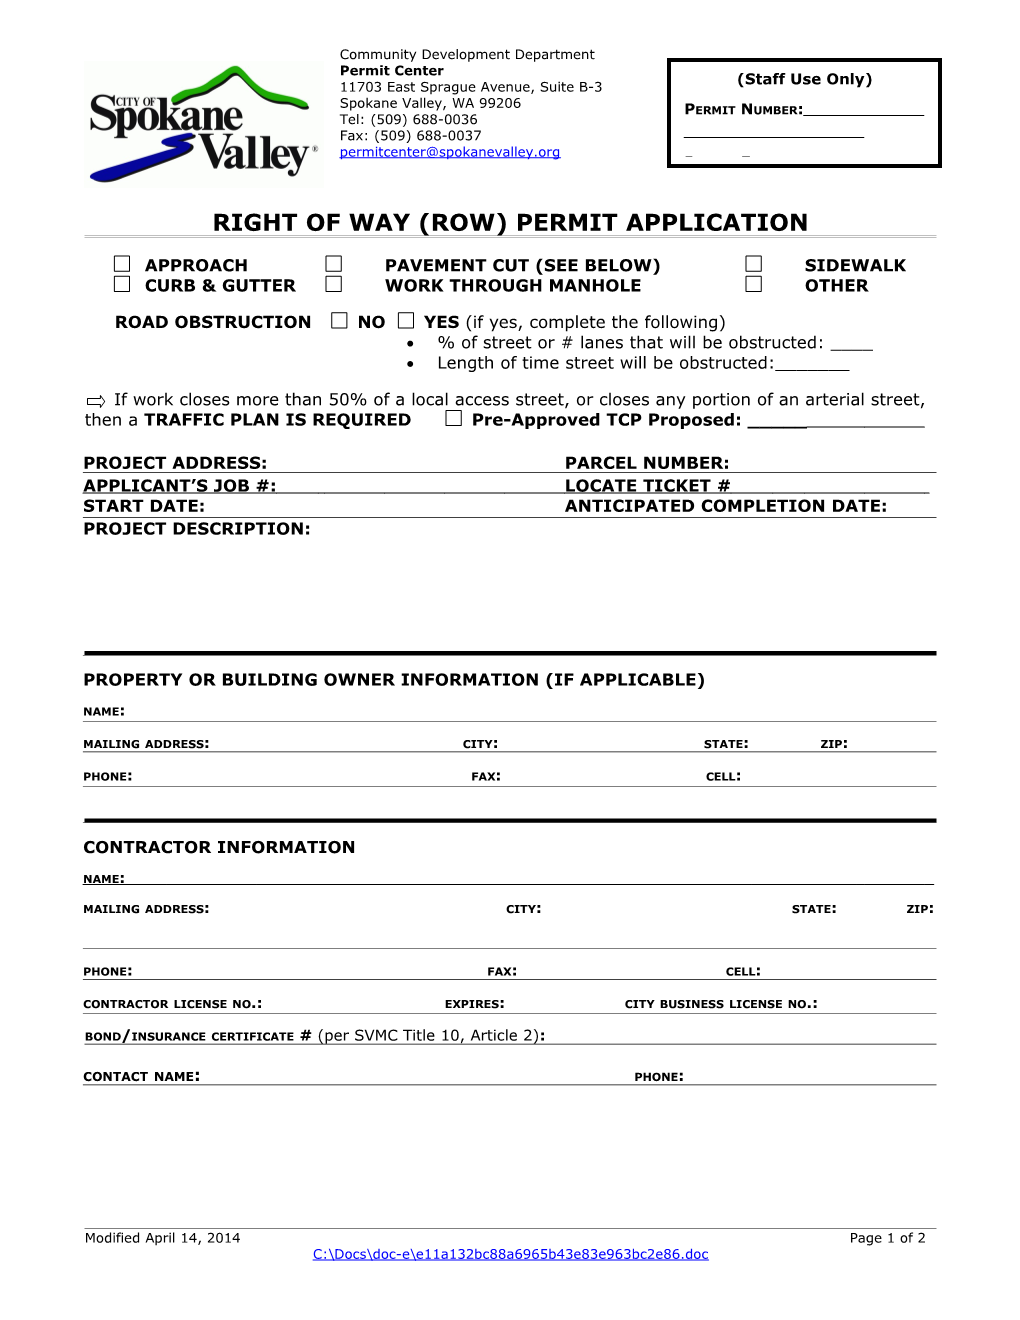 Right of Way (Row) Permit Application